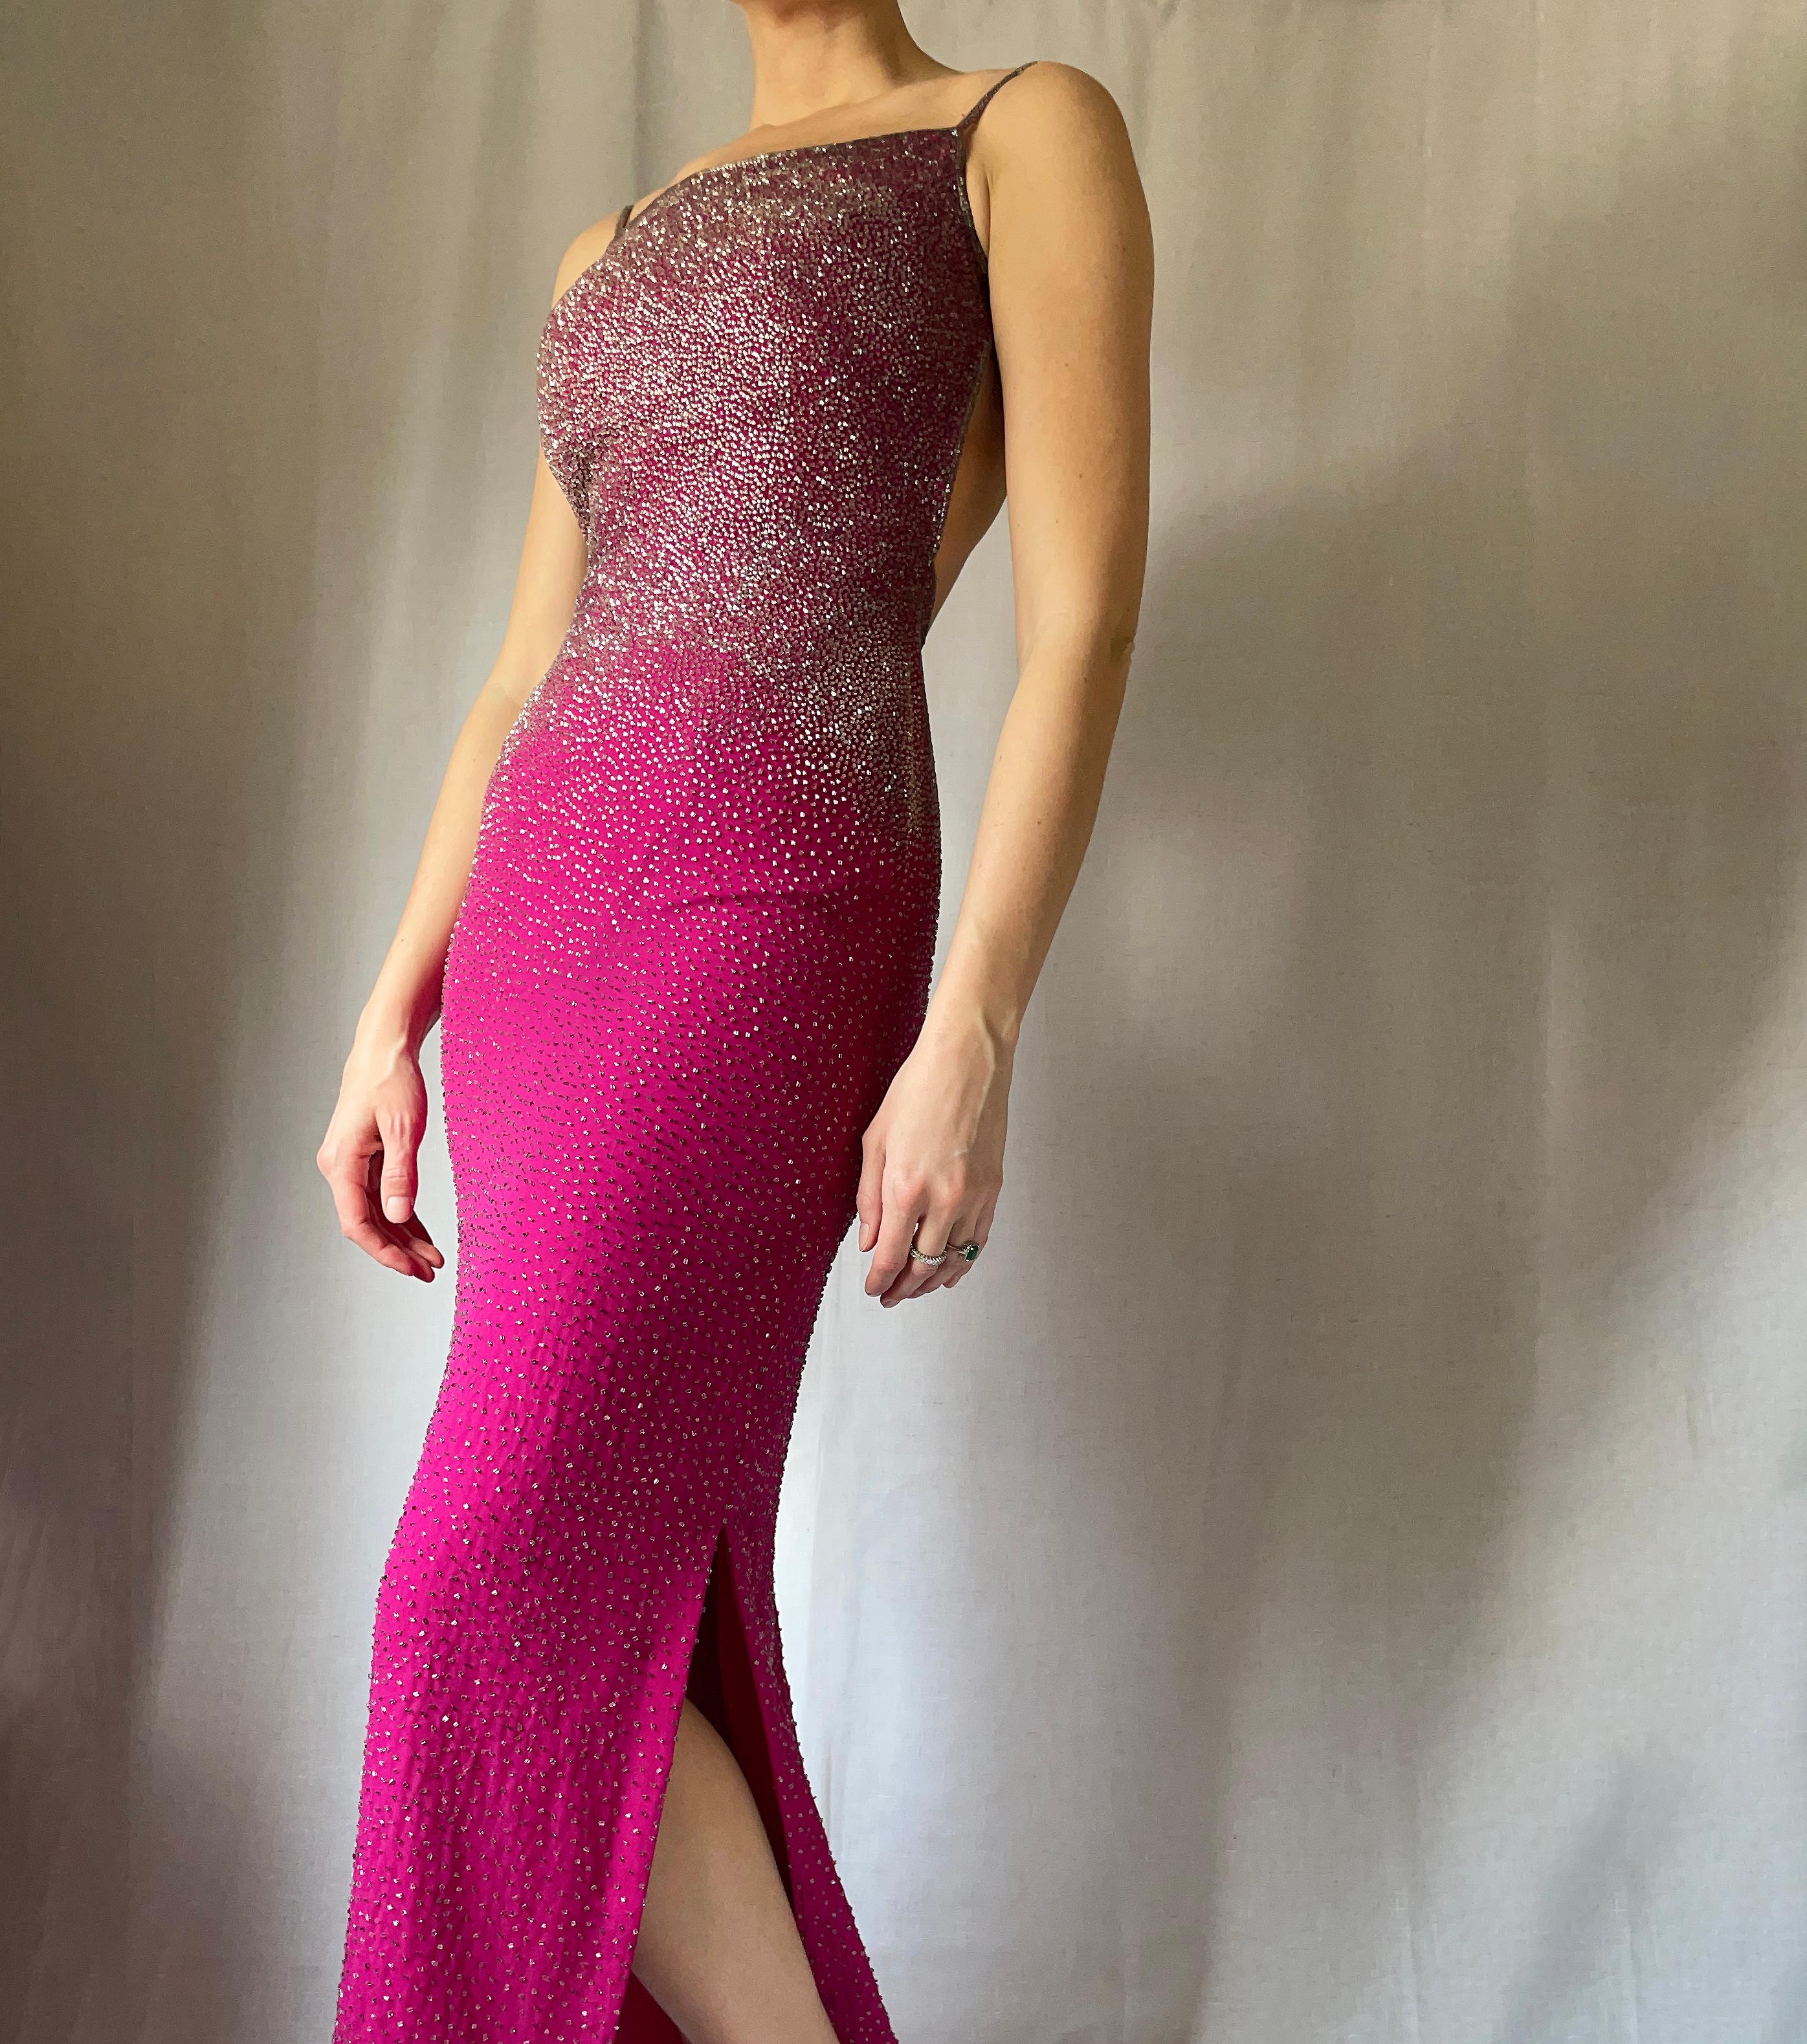 Vintage 1990s Saks Fifth Avenue Label Beaded Backless Gown: This dress is a seriously jaw-dropping moment: equal parts sexy and elegant. Made of 100% silk, it is intricately beaded all-over, with heavier beading and the top and more translucent